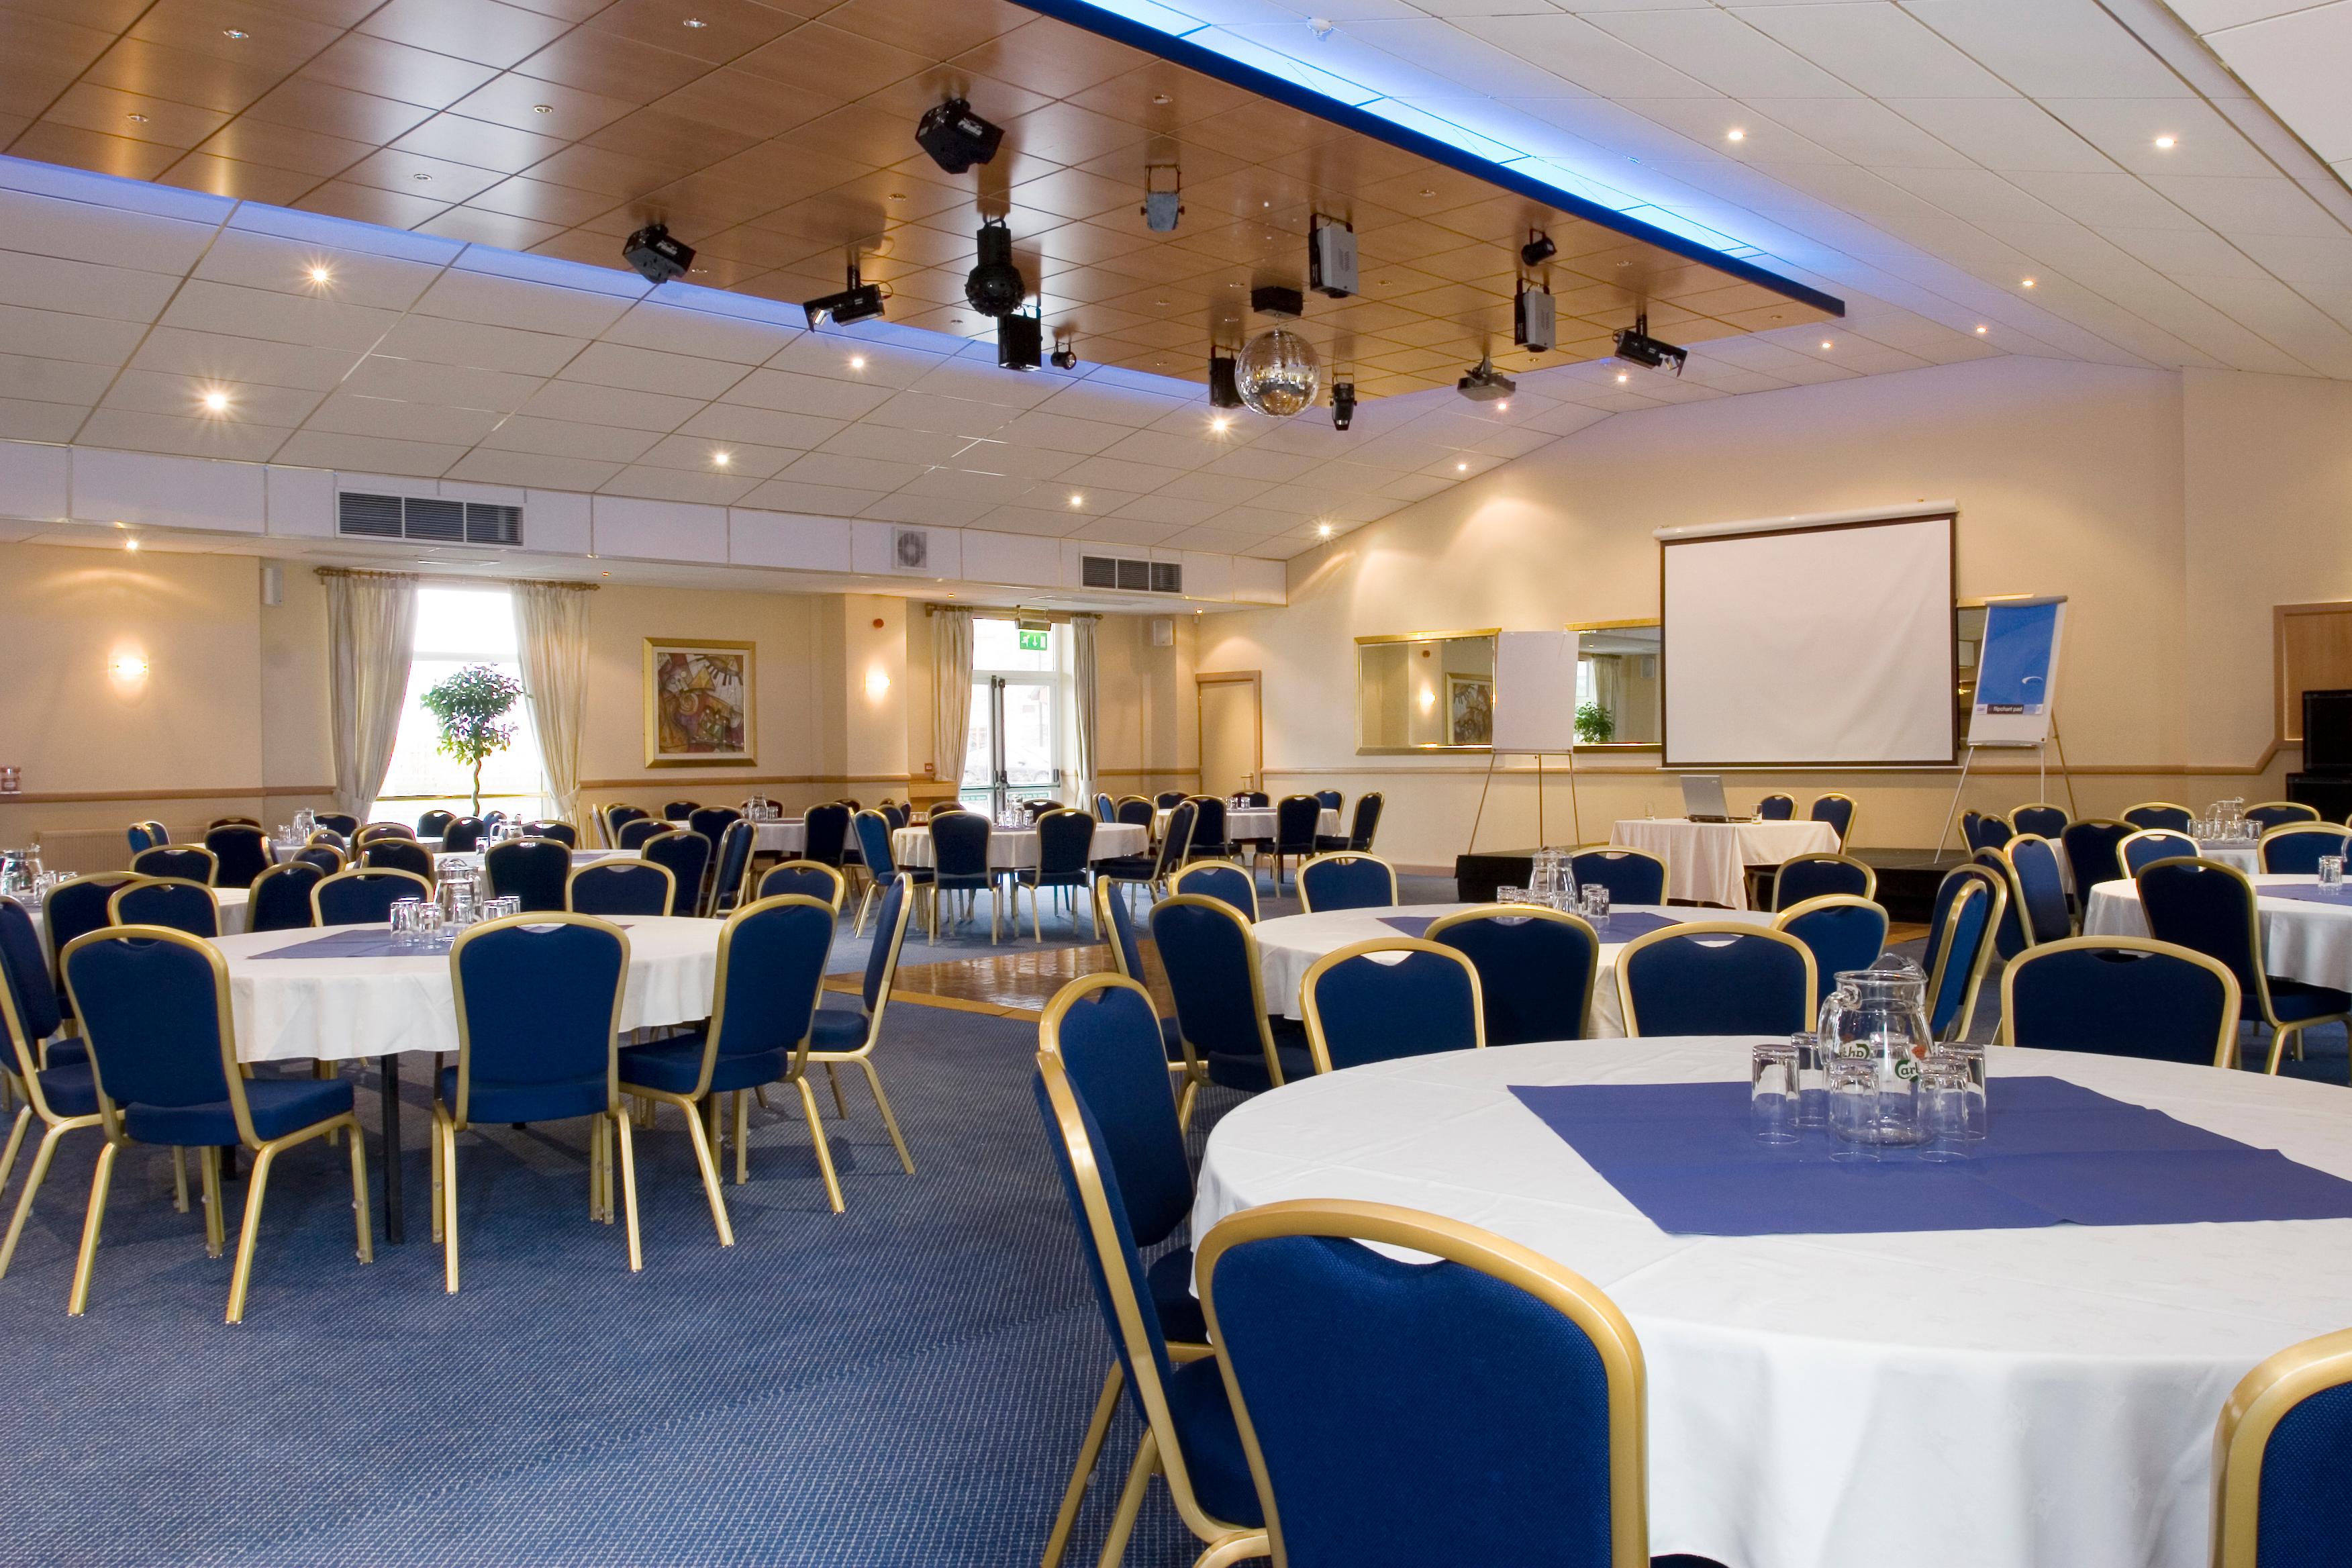 The Fairway And Bluebell Banqueting Suite, The Fairway Meeting Room photo #3